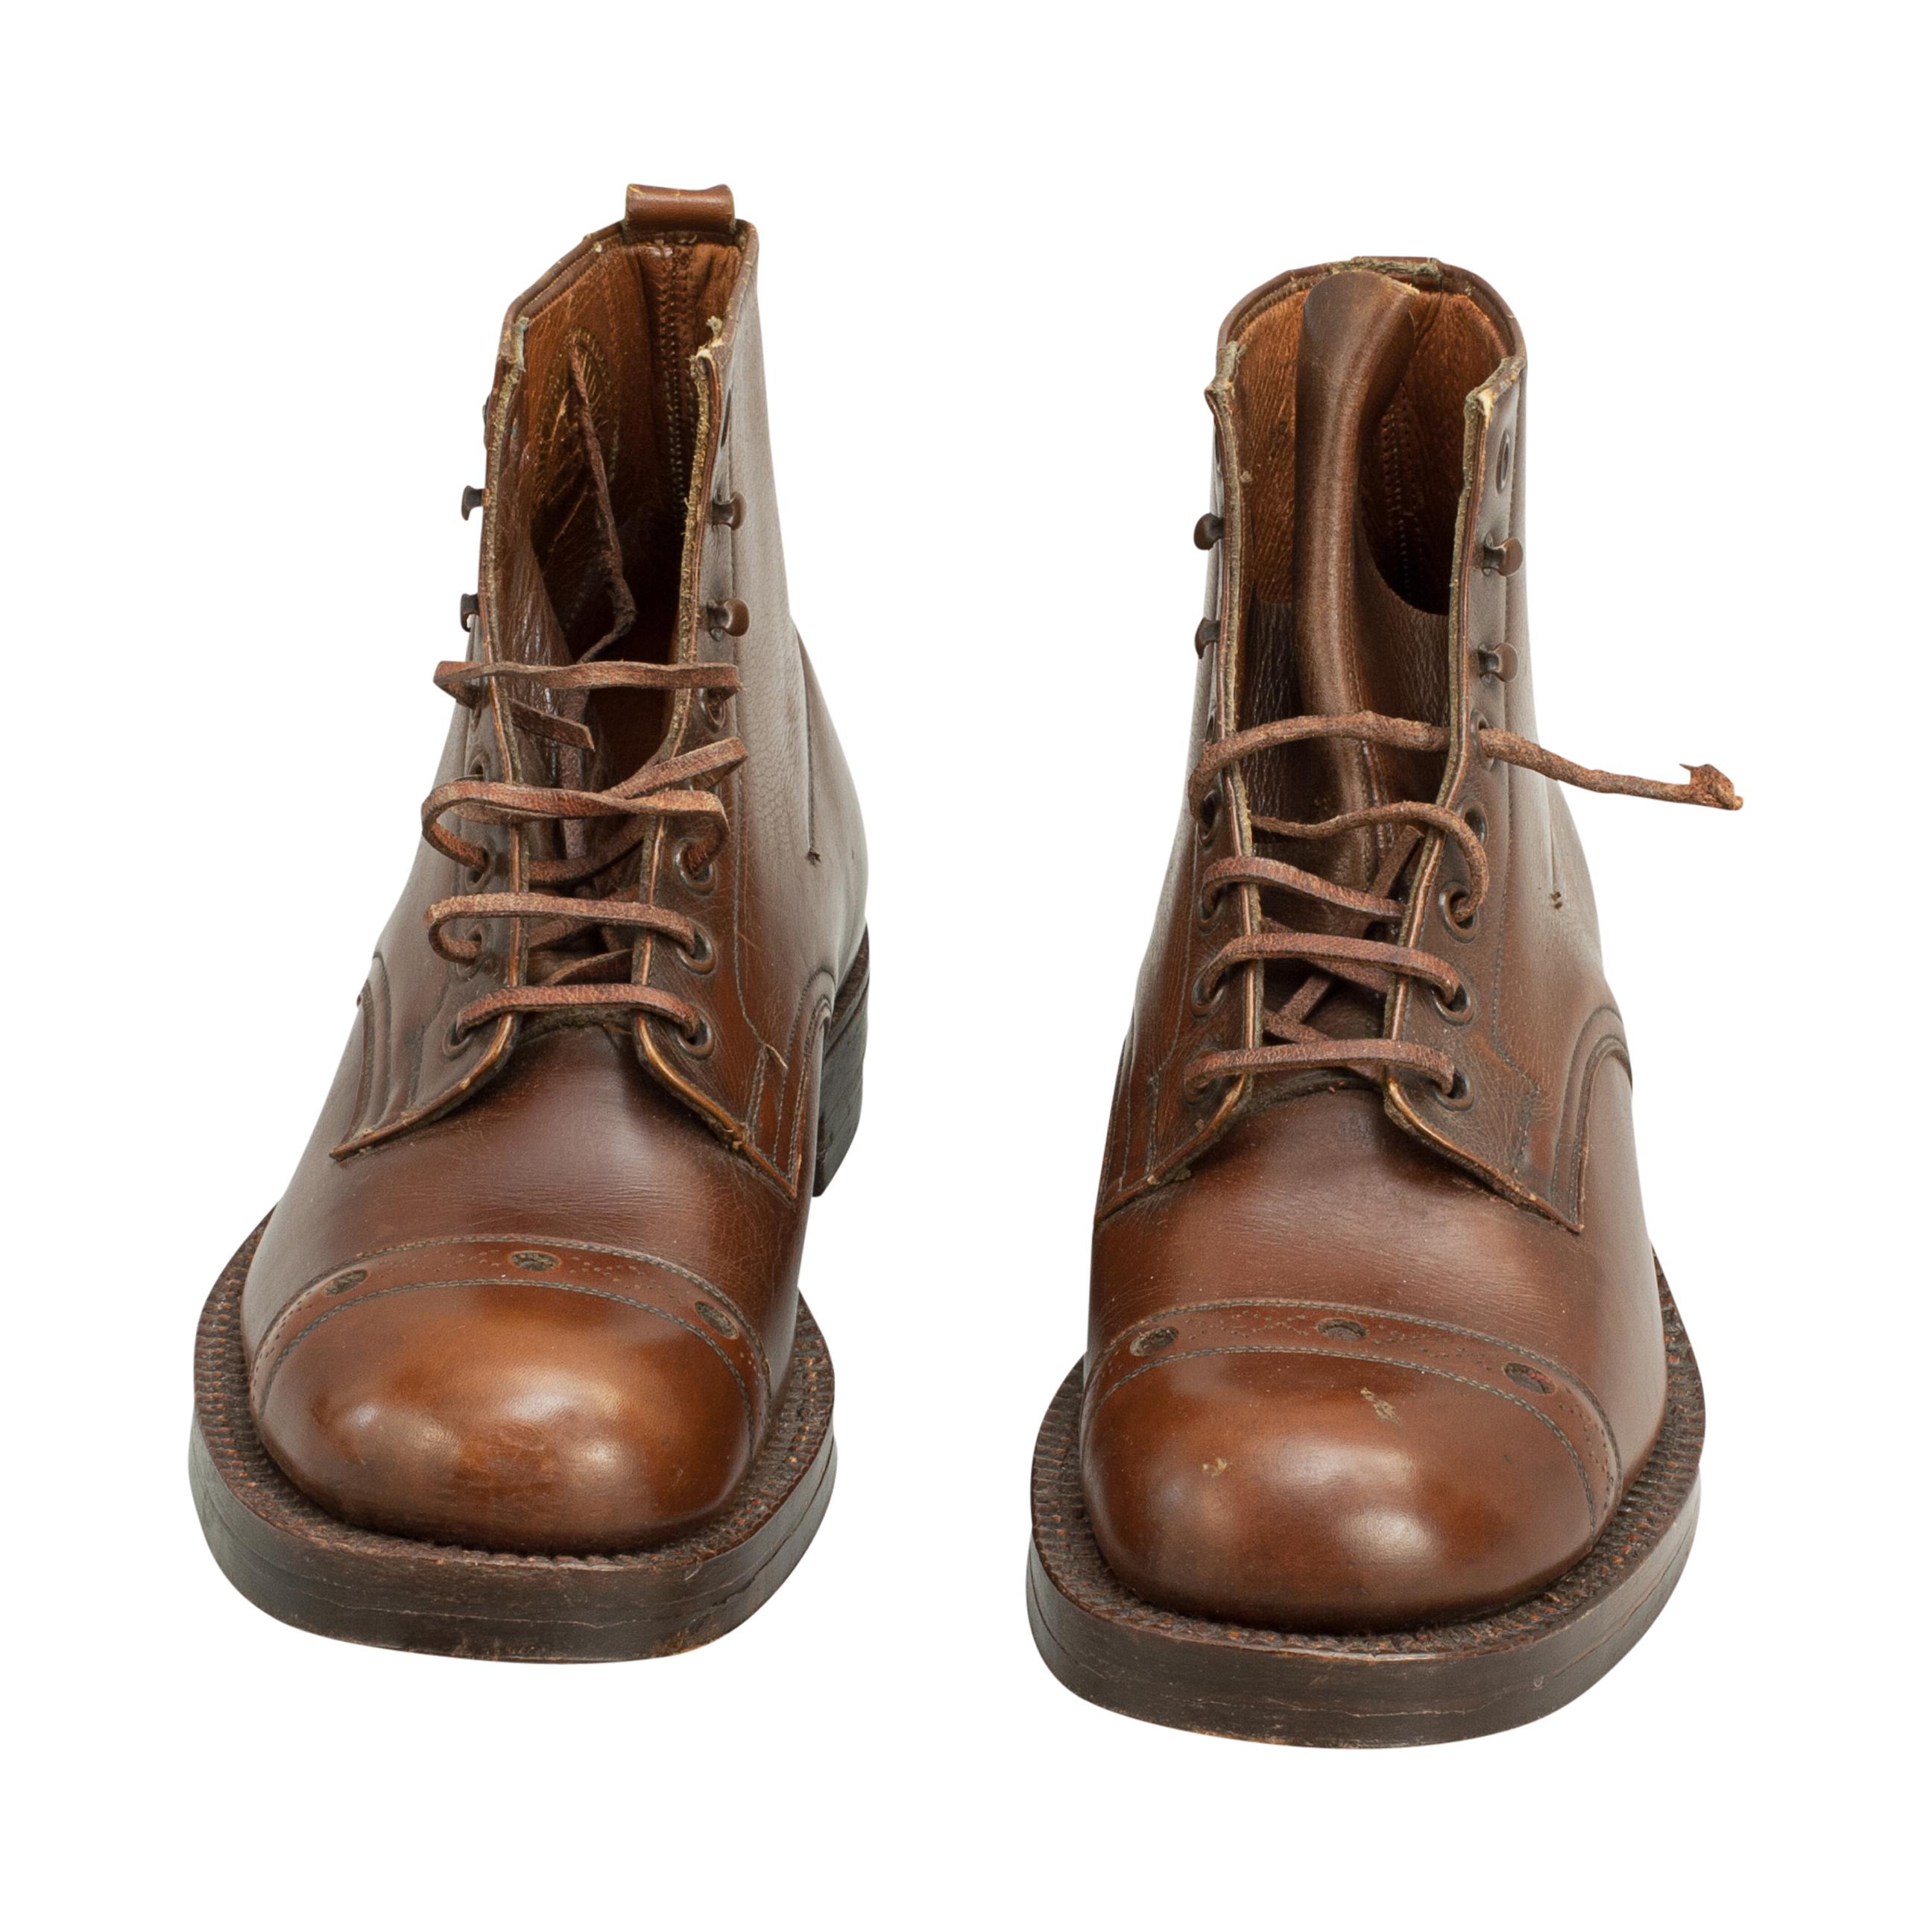 Vintage leather 'Road King' field boots
A great pair of brown leather ankle boots 'Road King' field boots. The boots are with lace-up eyelets, a couple of speed-hook eyelets and leather laces. The boots have hardly been worn, soles are in excellent